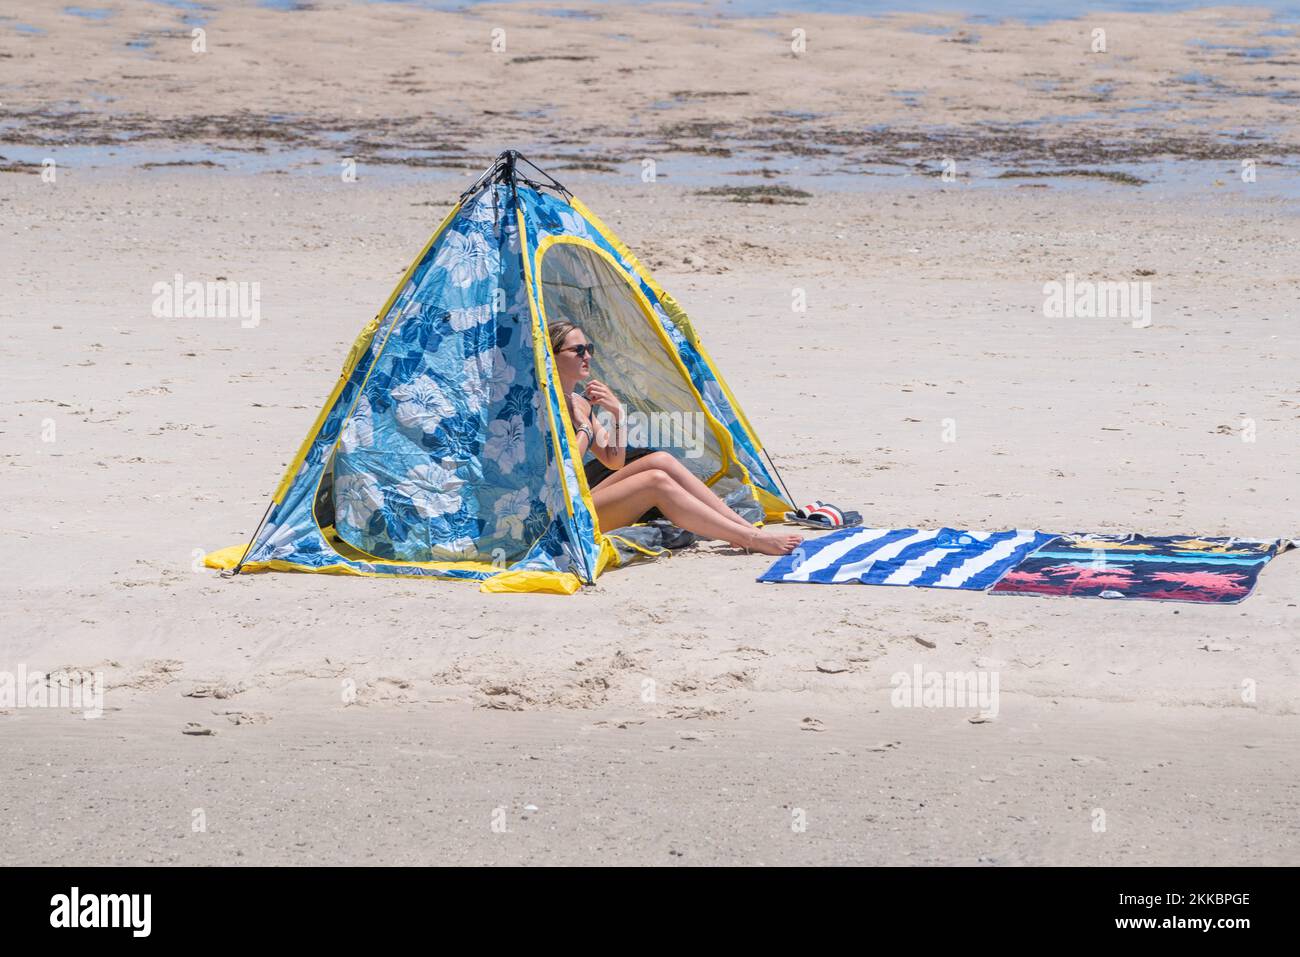 Adelaide, Australia. 25 November 2022.  A sunbather sits under a tent   in the hot weather at the beach in Adelaide Australia as temperatures are forecast to reach above 30celsius. Credit: amer ghazzal/Alamy Live News Stock Photo